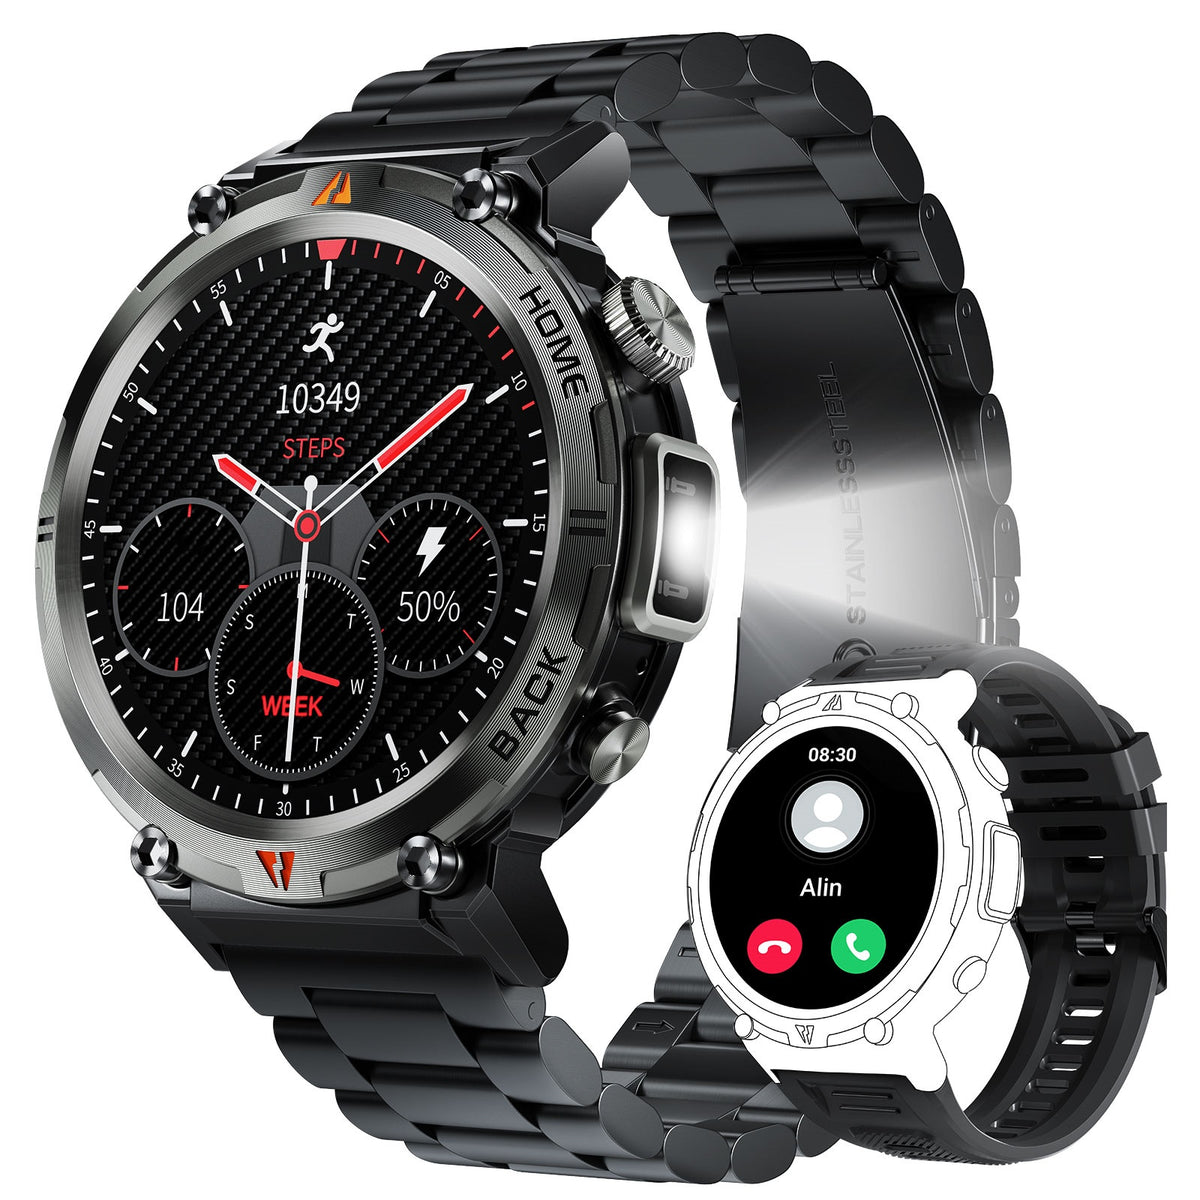 Reloj Digital Smartwatch Huawei GT 3 Touch Bluetooth 5.2 Android